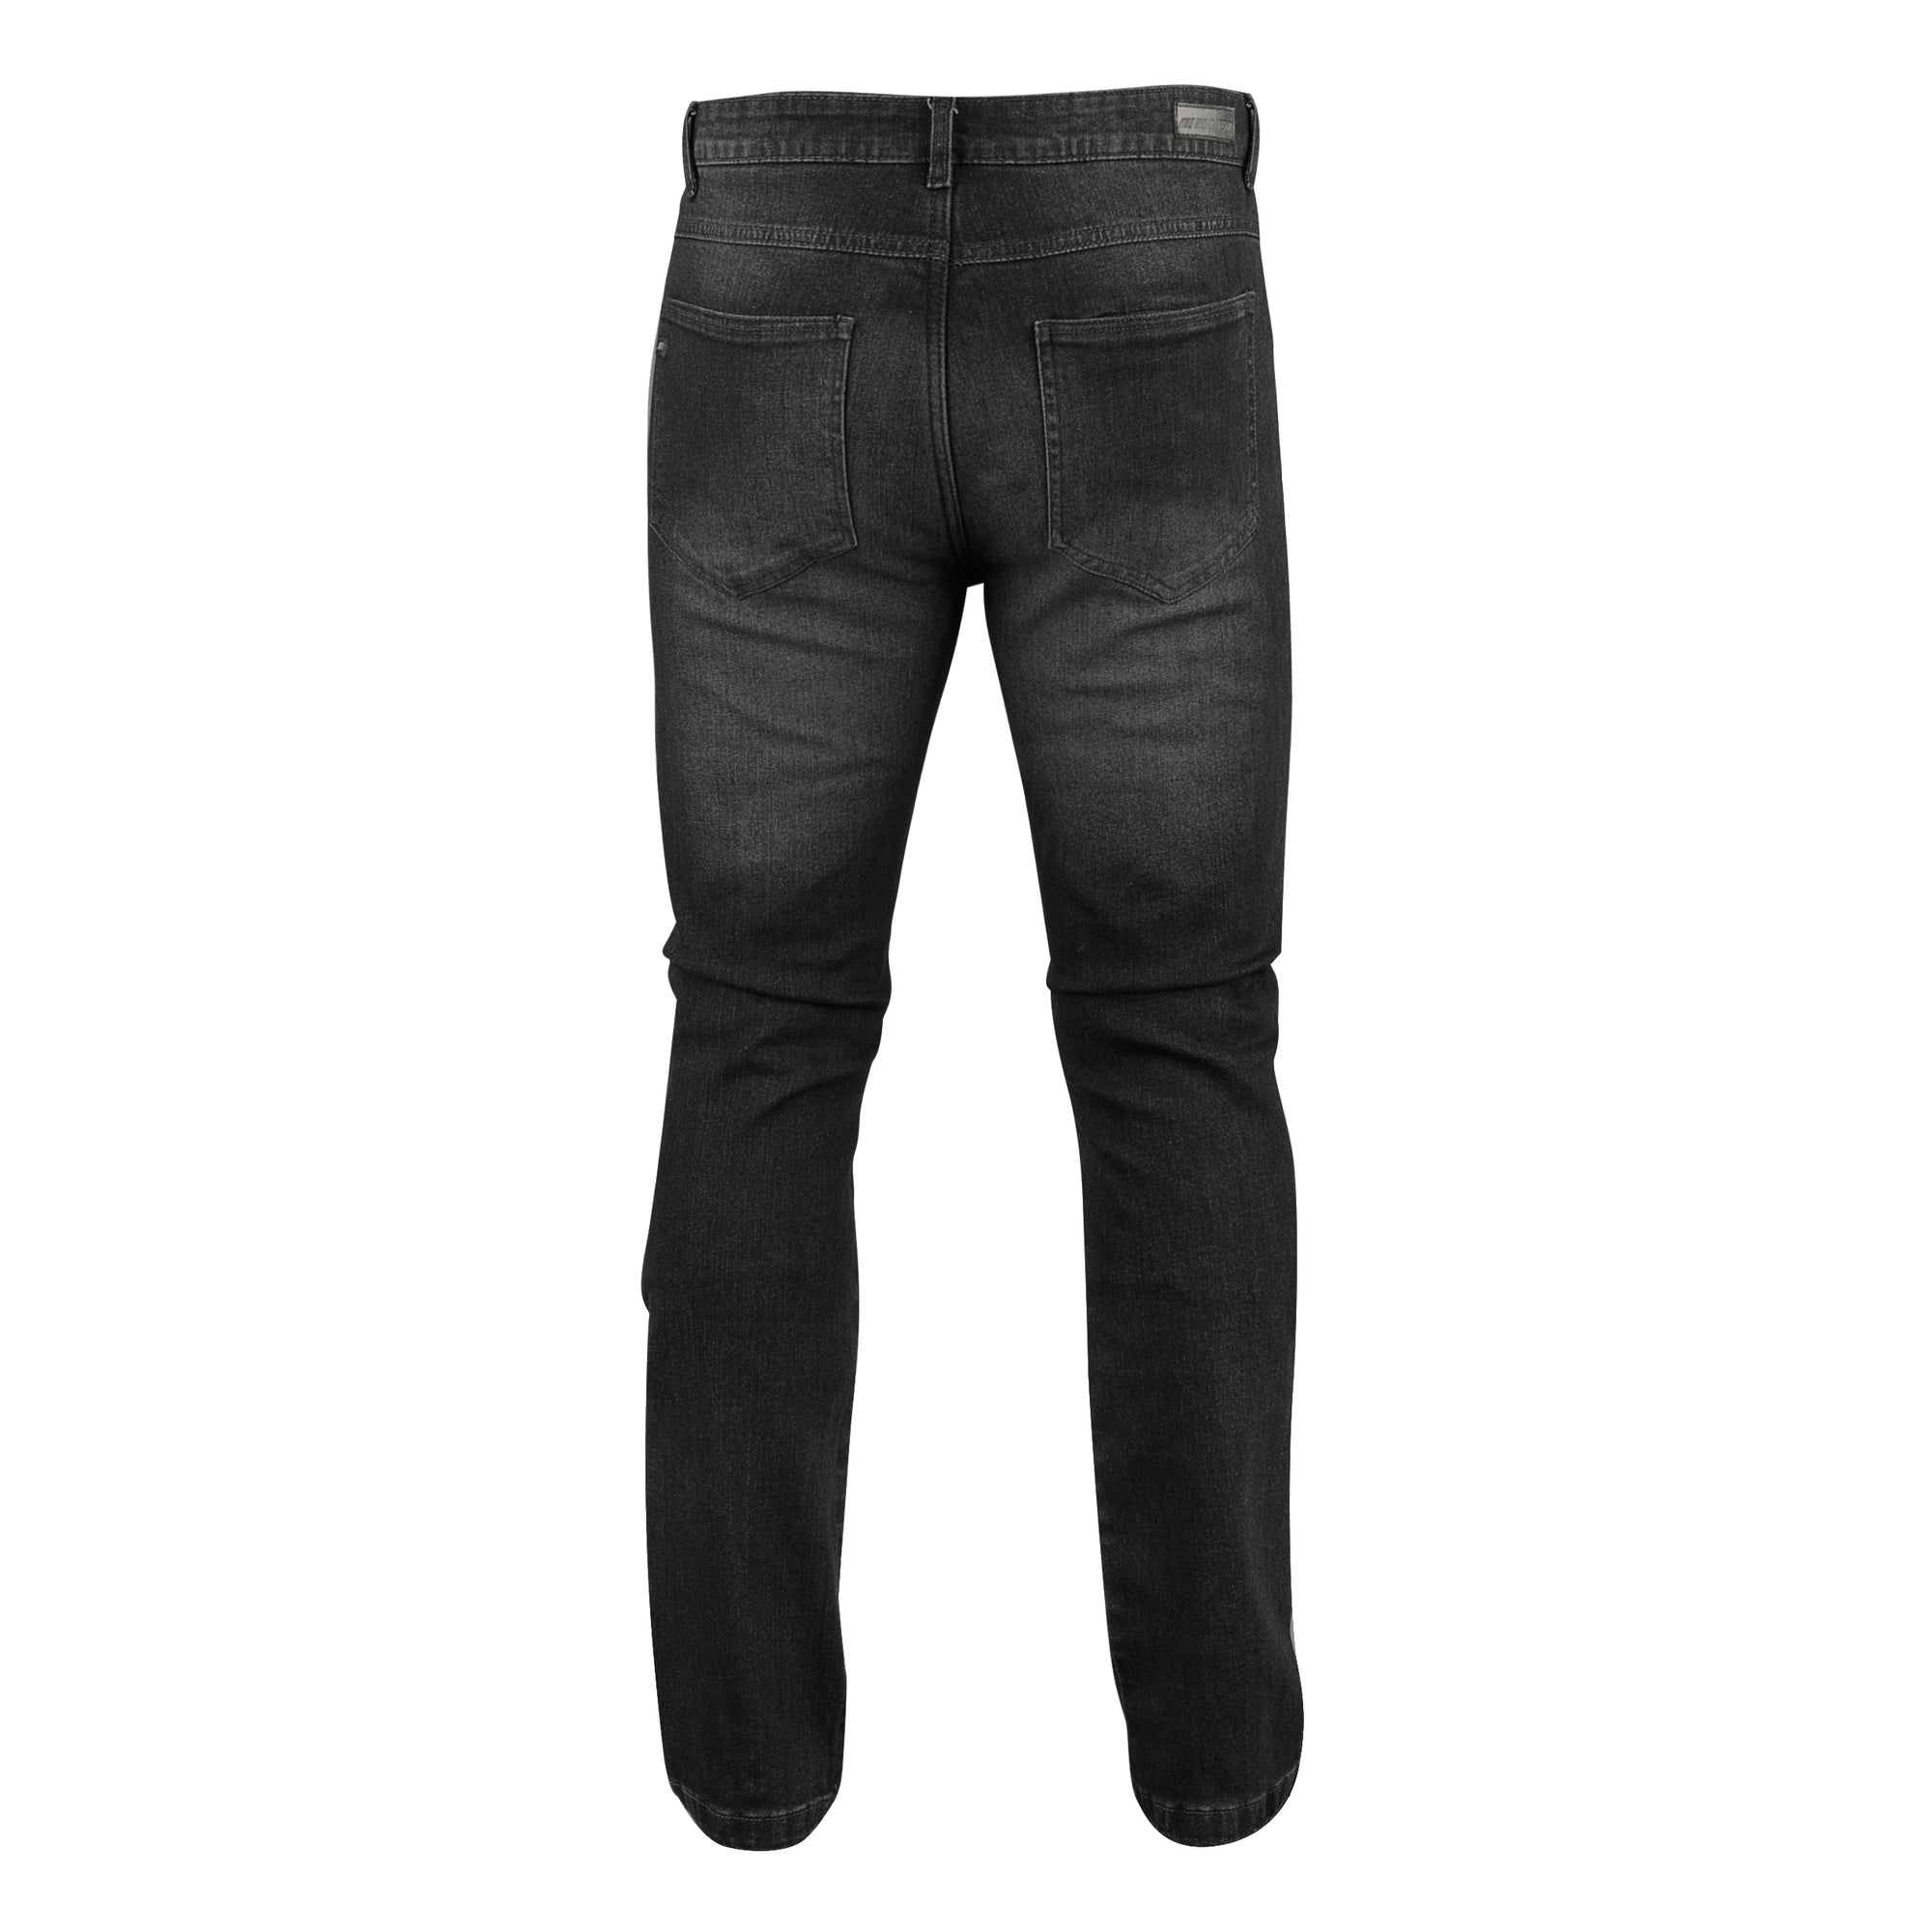 size 24 jeans conversion - OFF-56% >Free Delivery